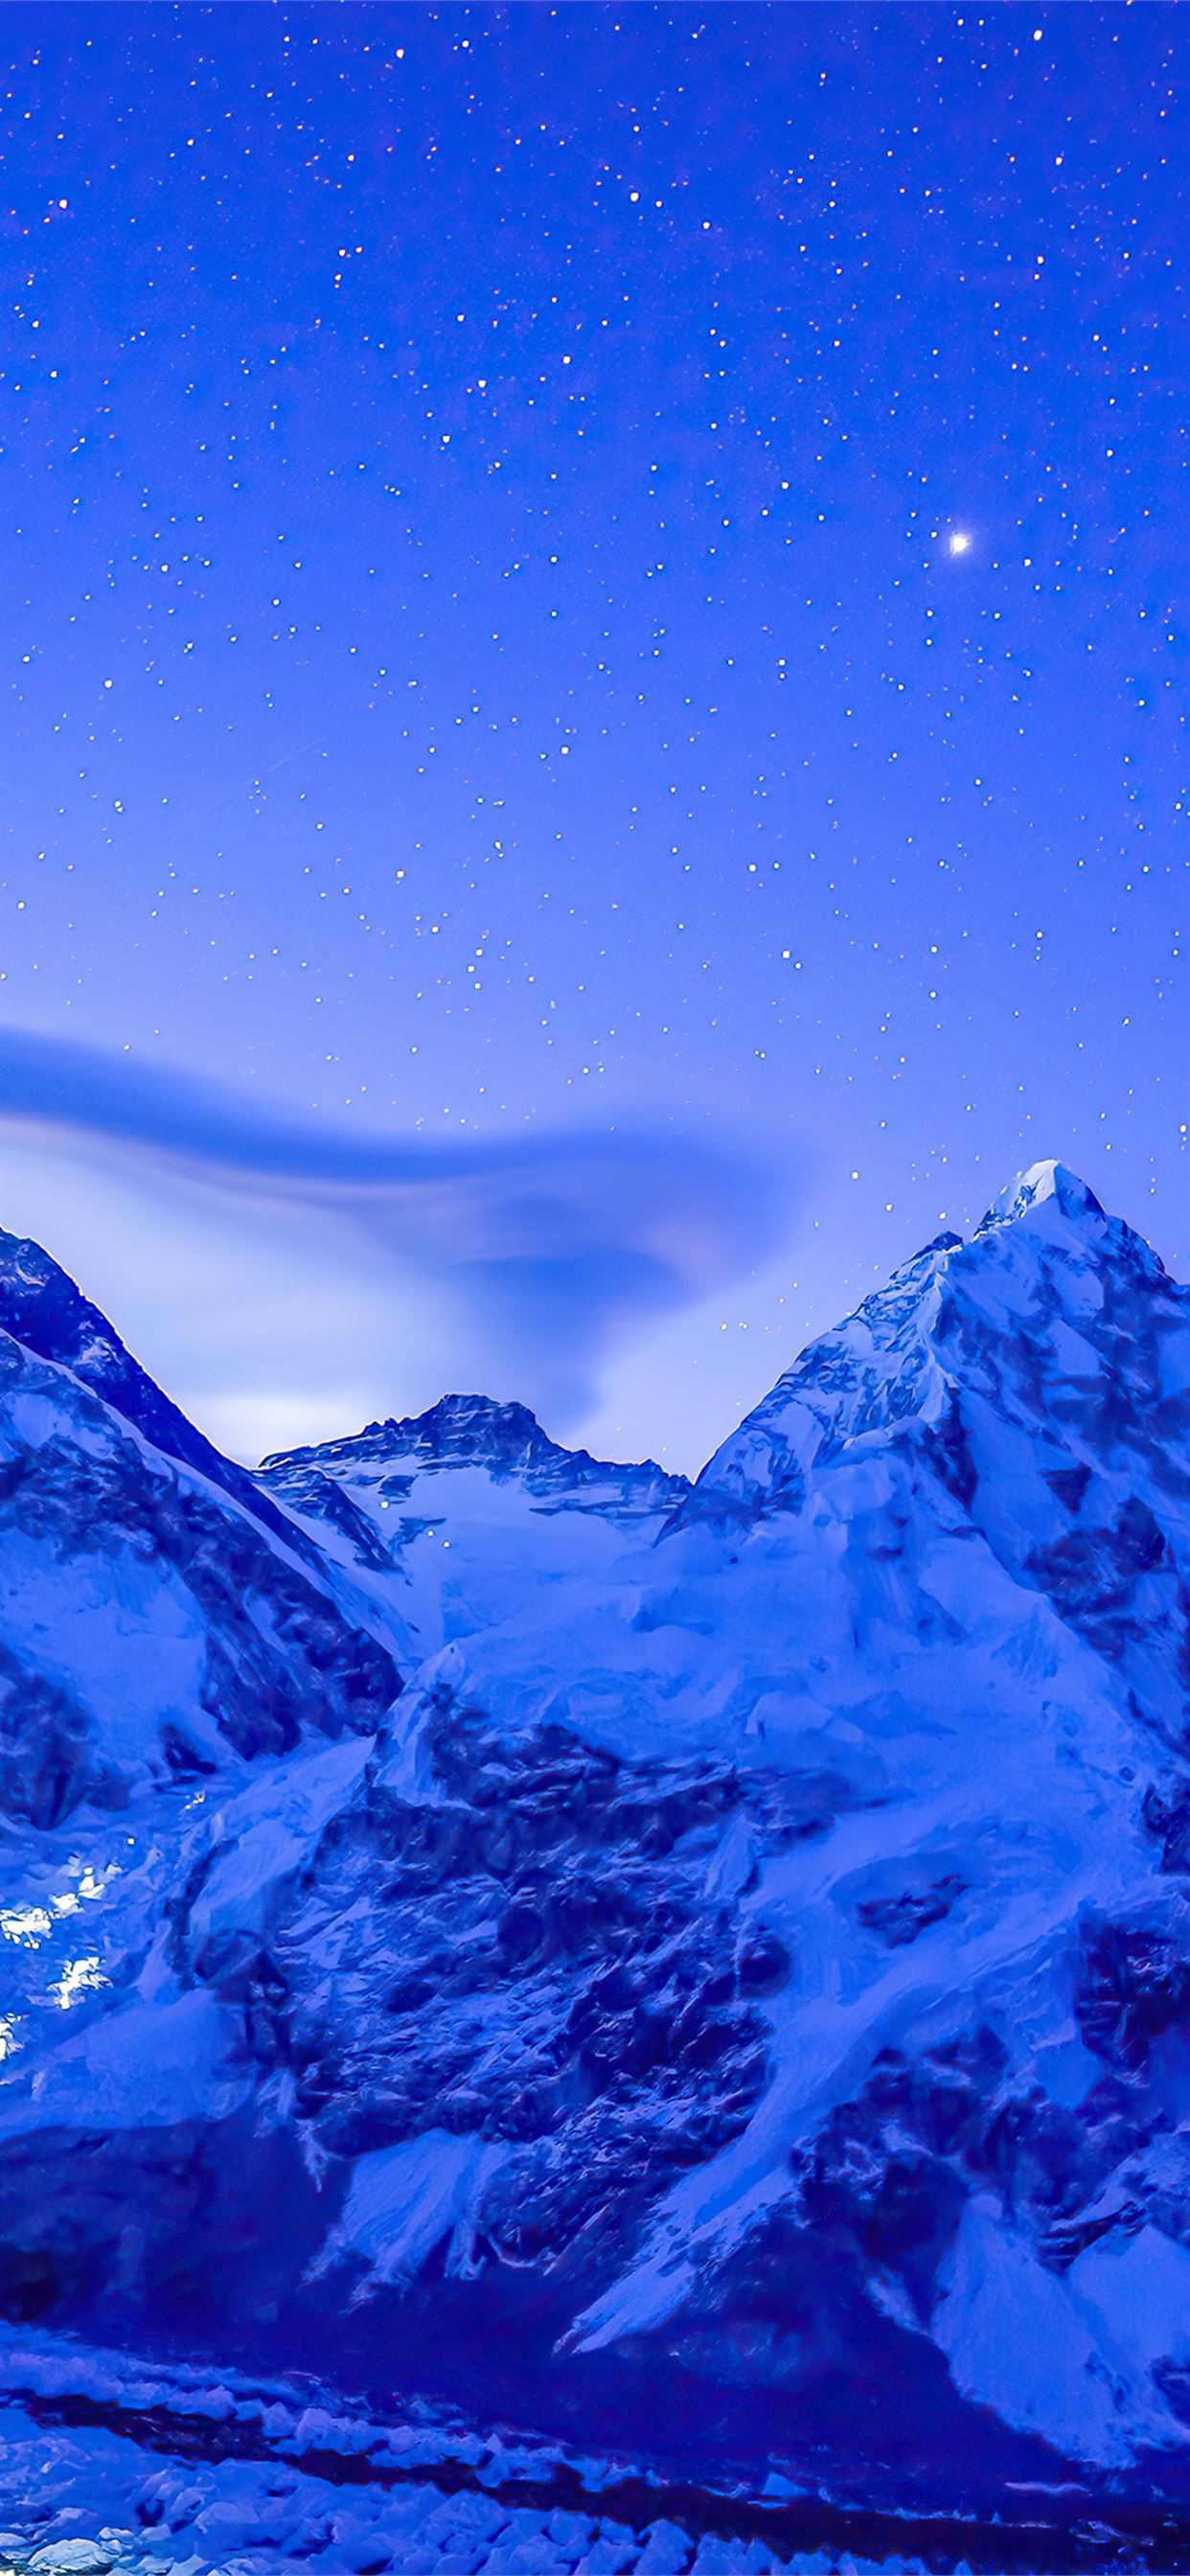 Mount Everest view during daytime iPhone X Wallpapers Free Download